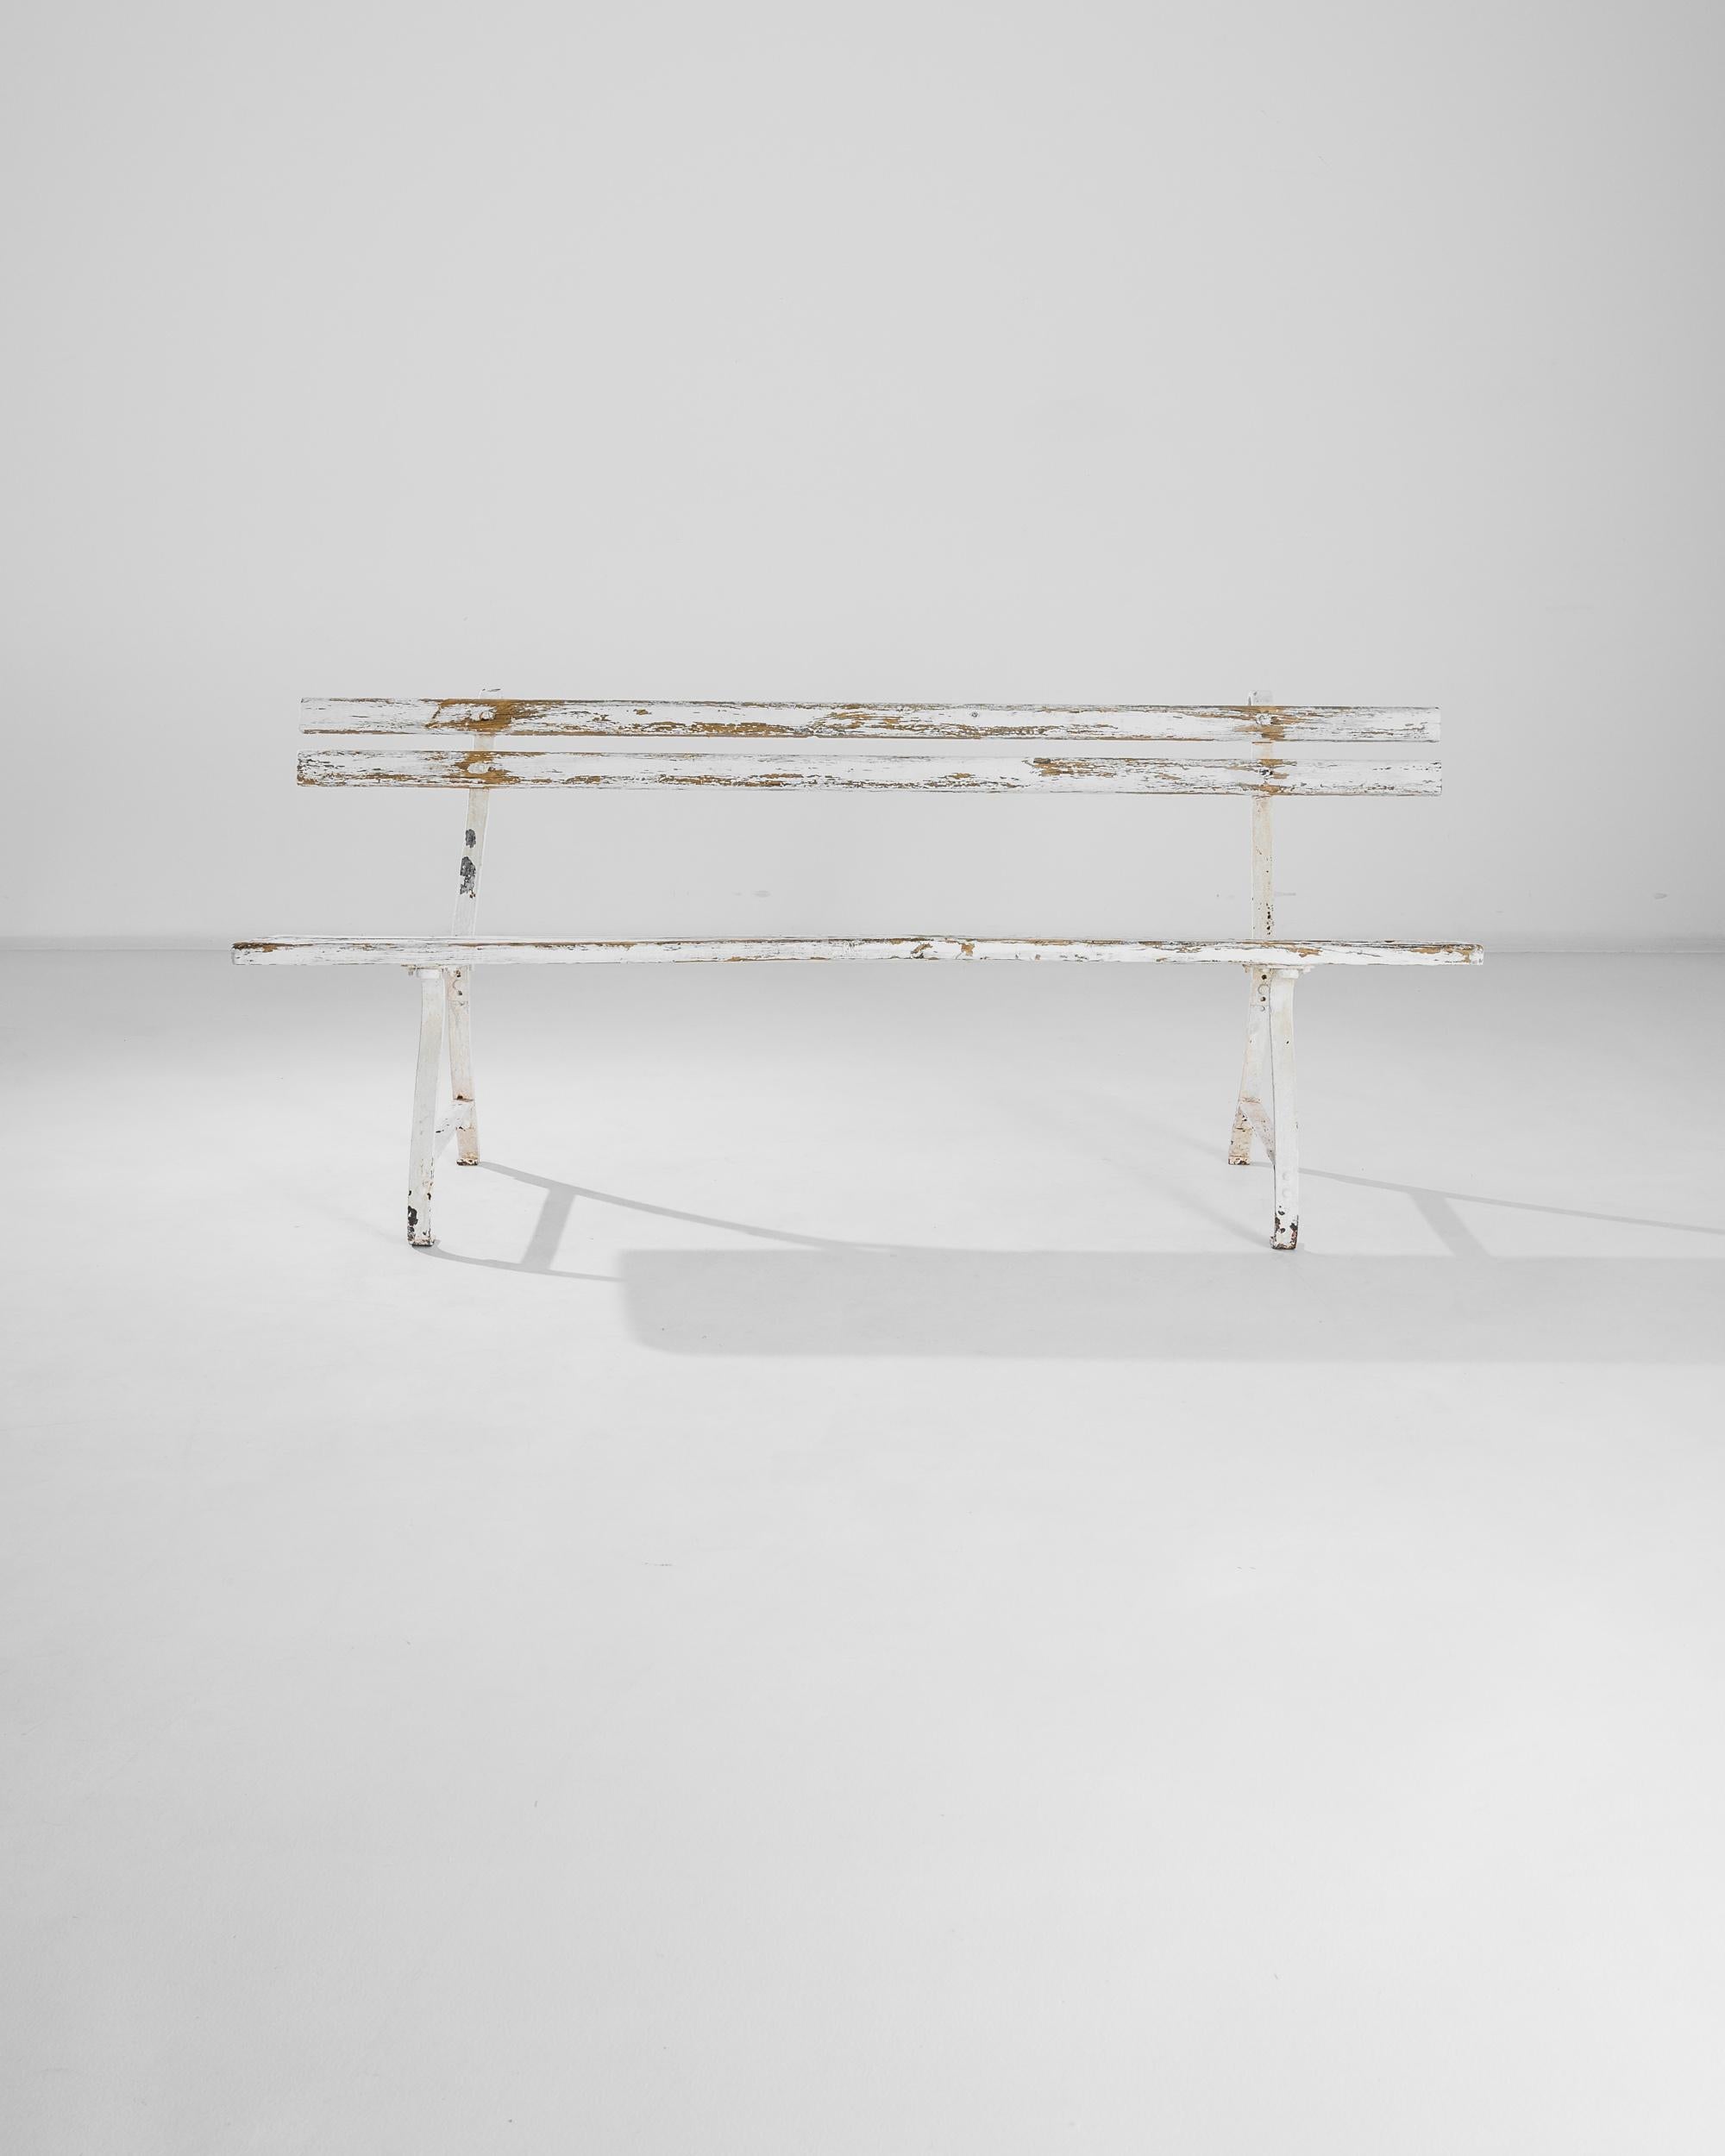 This antique wooden bench with metal frame was produced in France, circa 1920. Nicely distressed, the charming bench offers a slender silhouette, invigorated by splay legs curved inward. The white paint flaunts a mature patina, revealing the